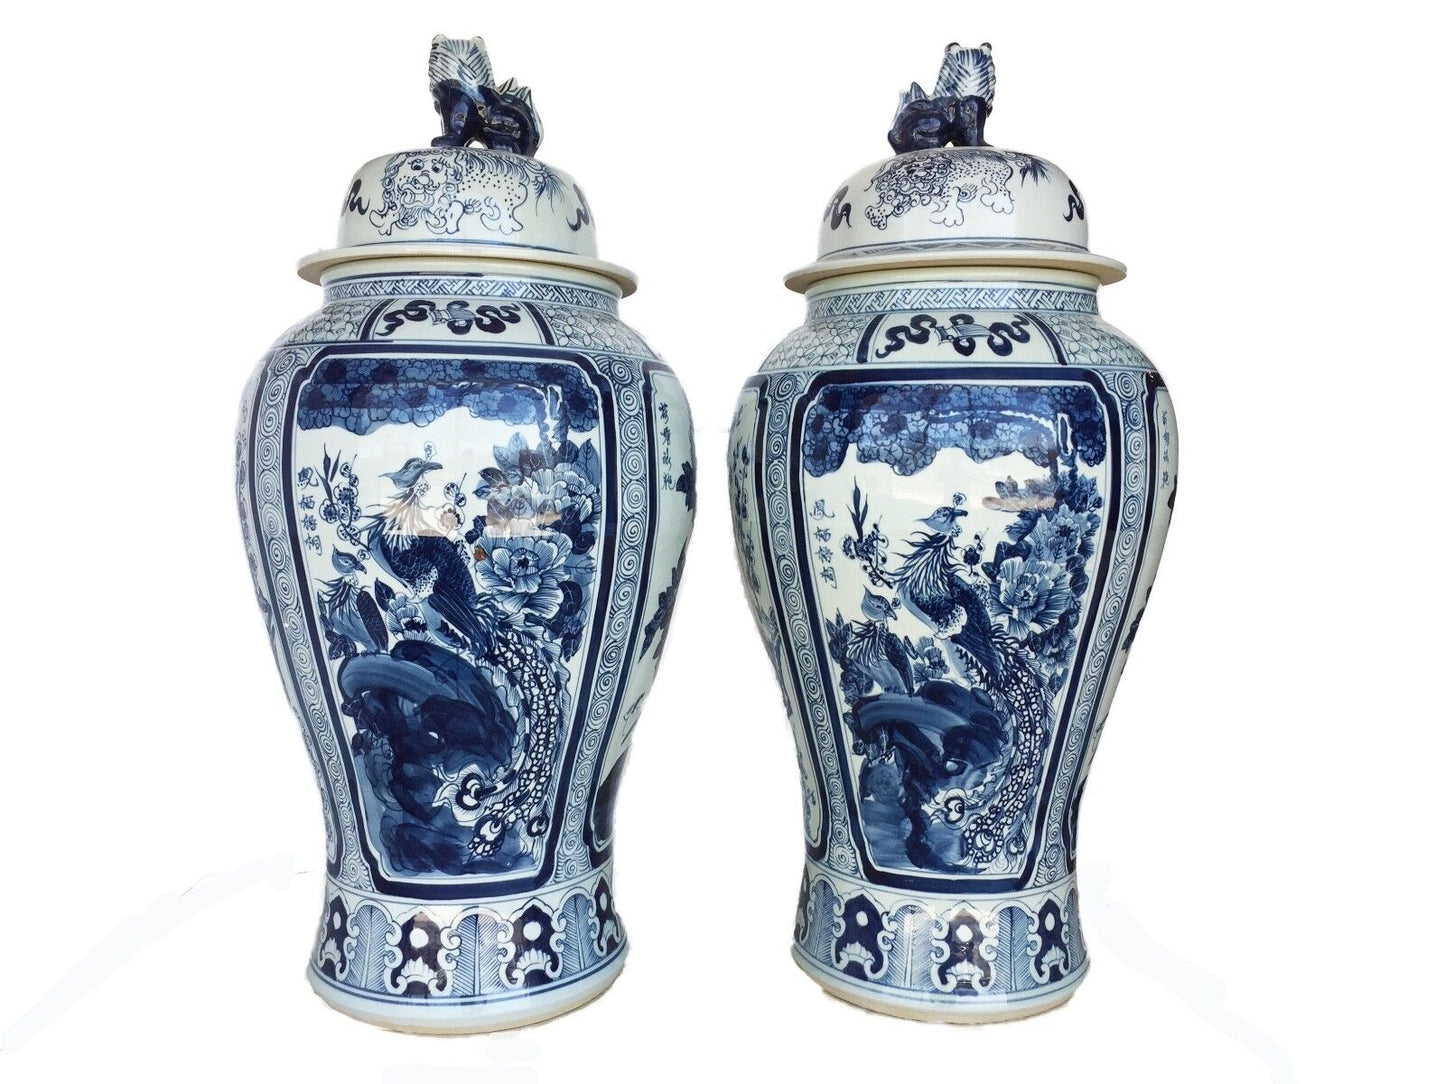 #975 Mansion Size Chinoiserie B & W Porcelain Ginger Jars four seasons Pair 35.5" H